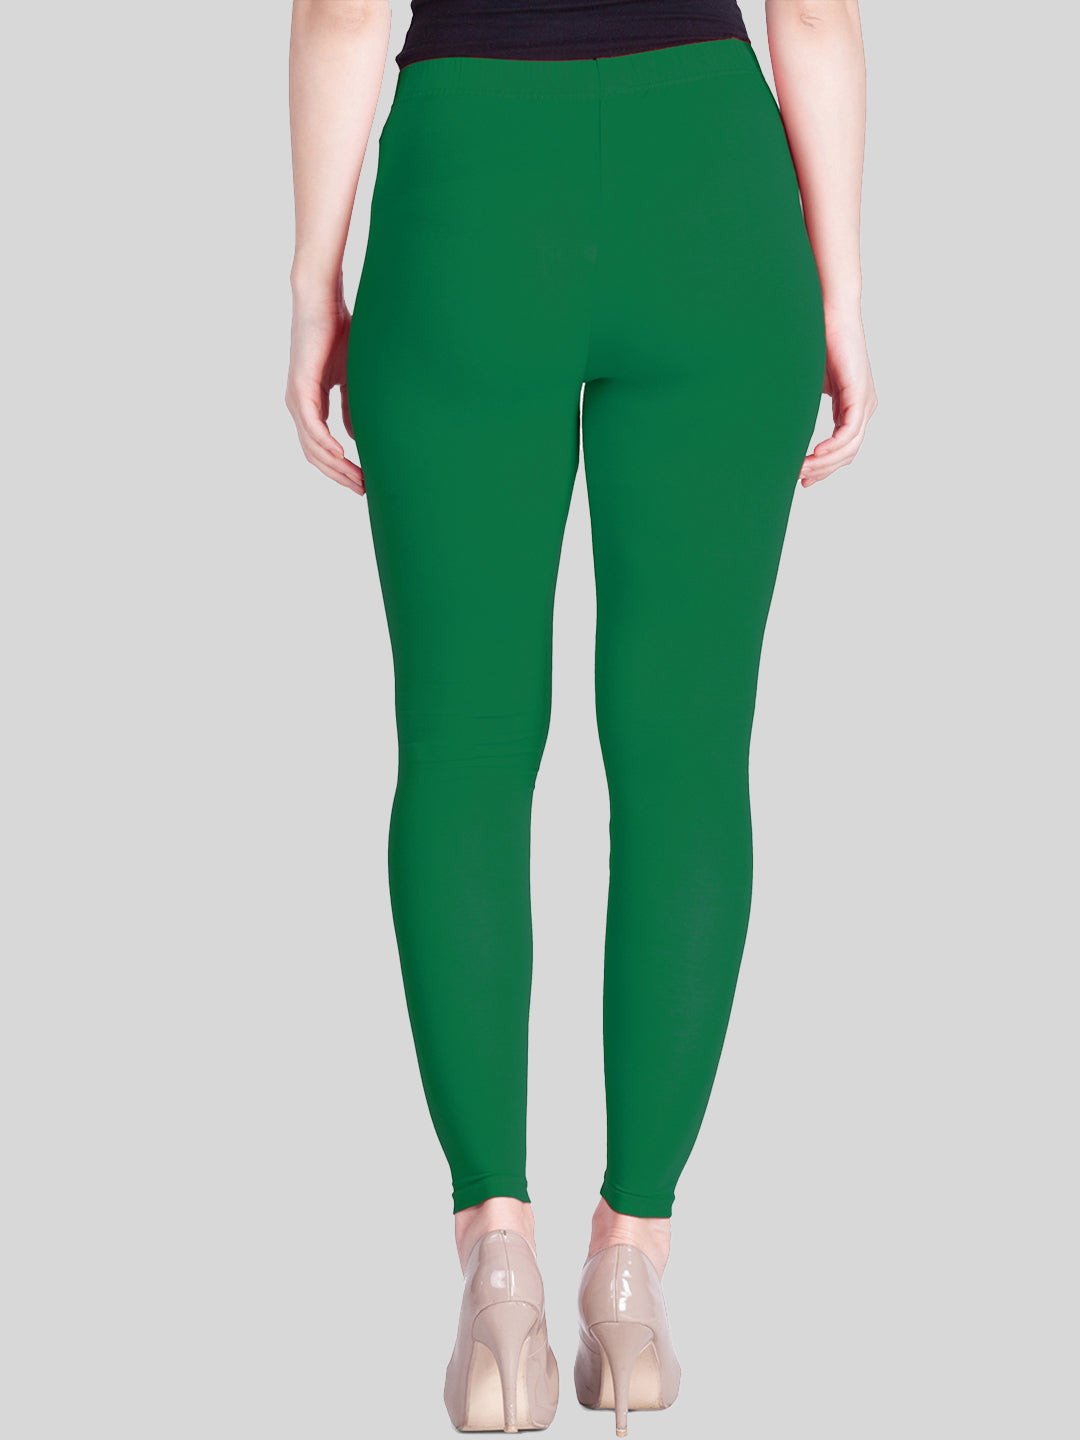 Dazzling Green Colored Casual Wear Ankle Length Leggings